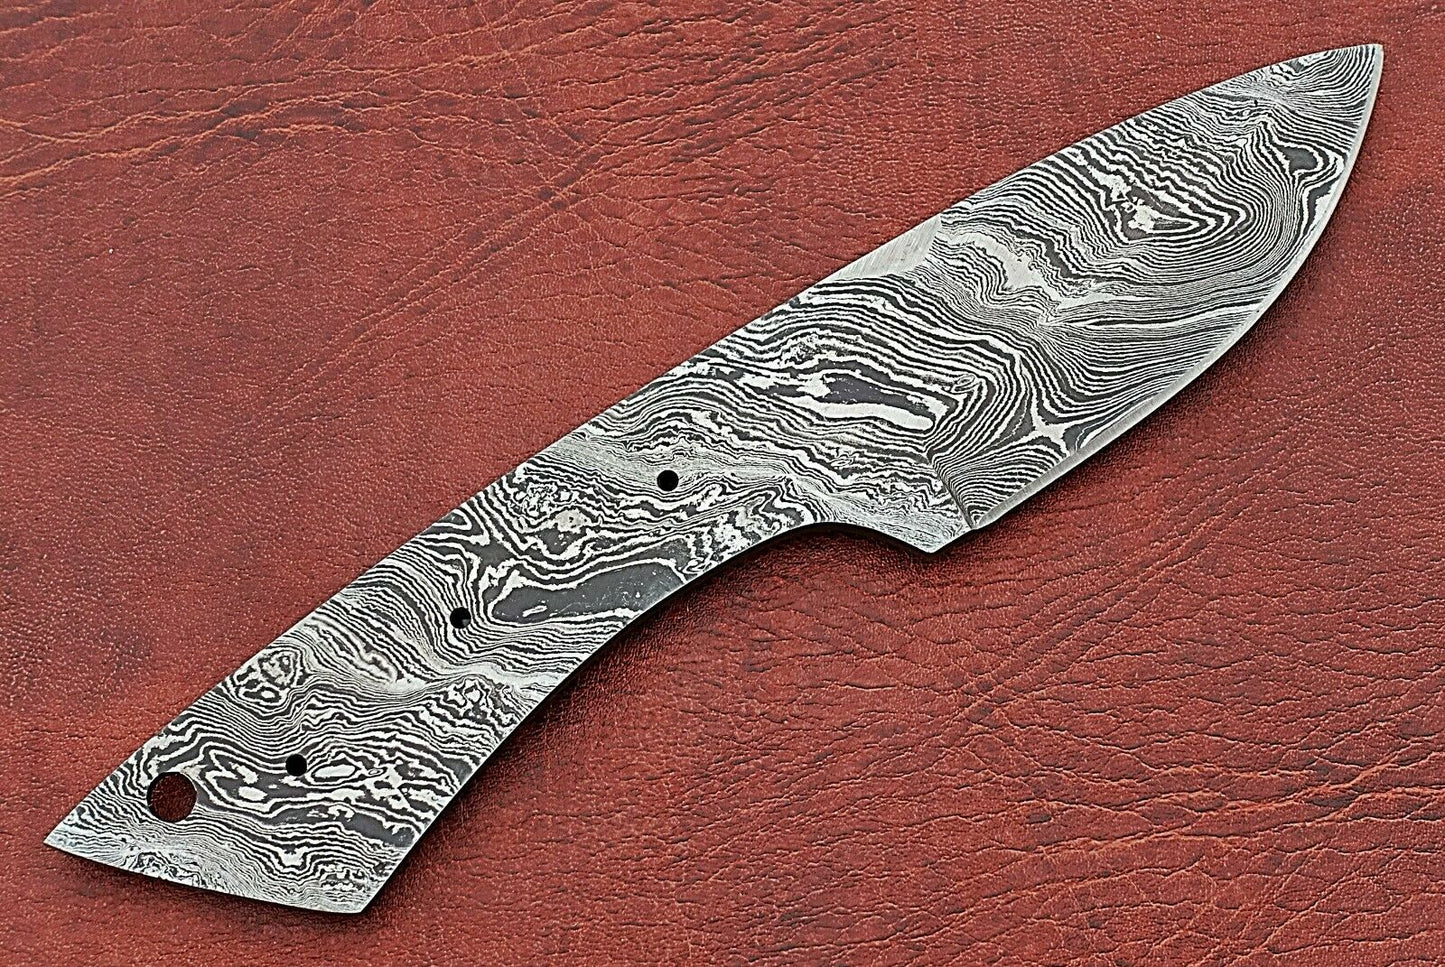 7.75" drop point Damascus steel blank blade pocket knife with 3.5" cutting edge